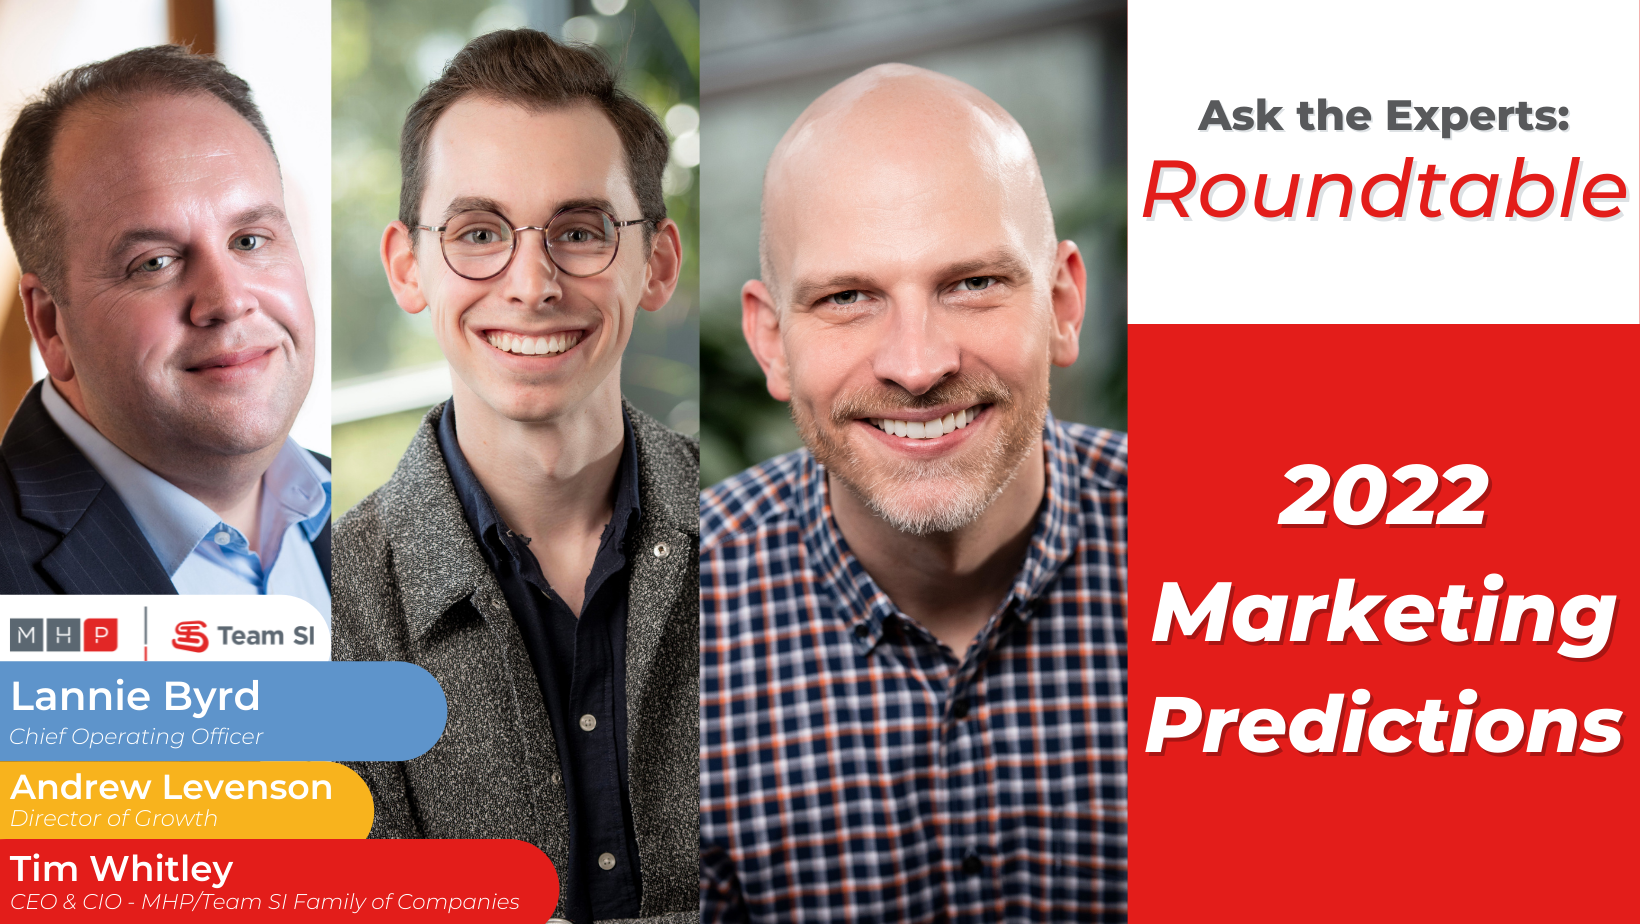 Ask the Experts Roundtable Discussion 2022 Marketing Predictions